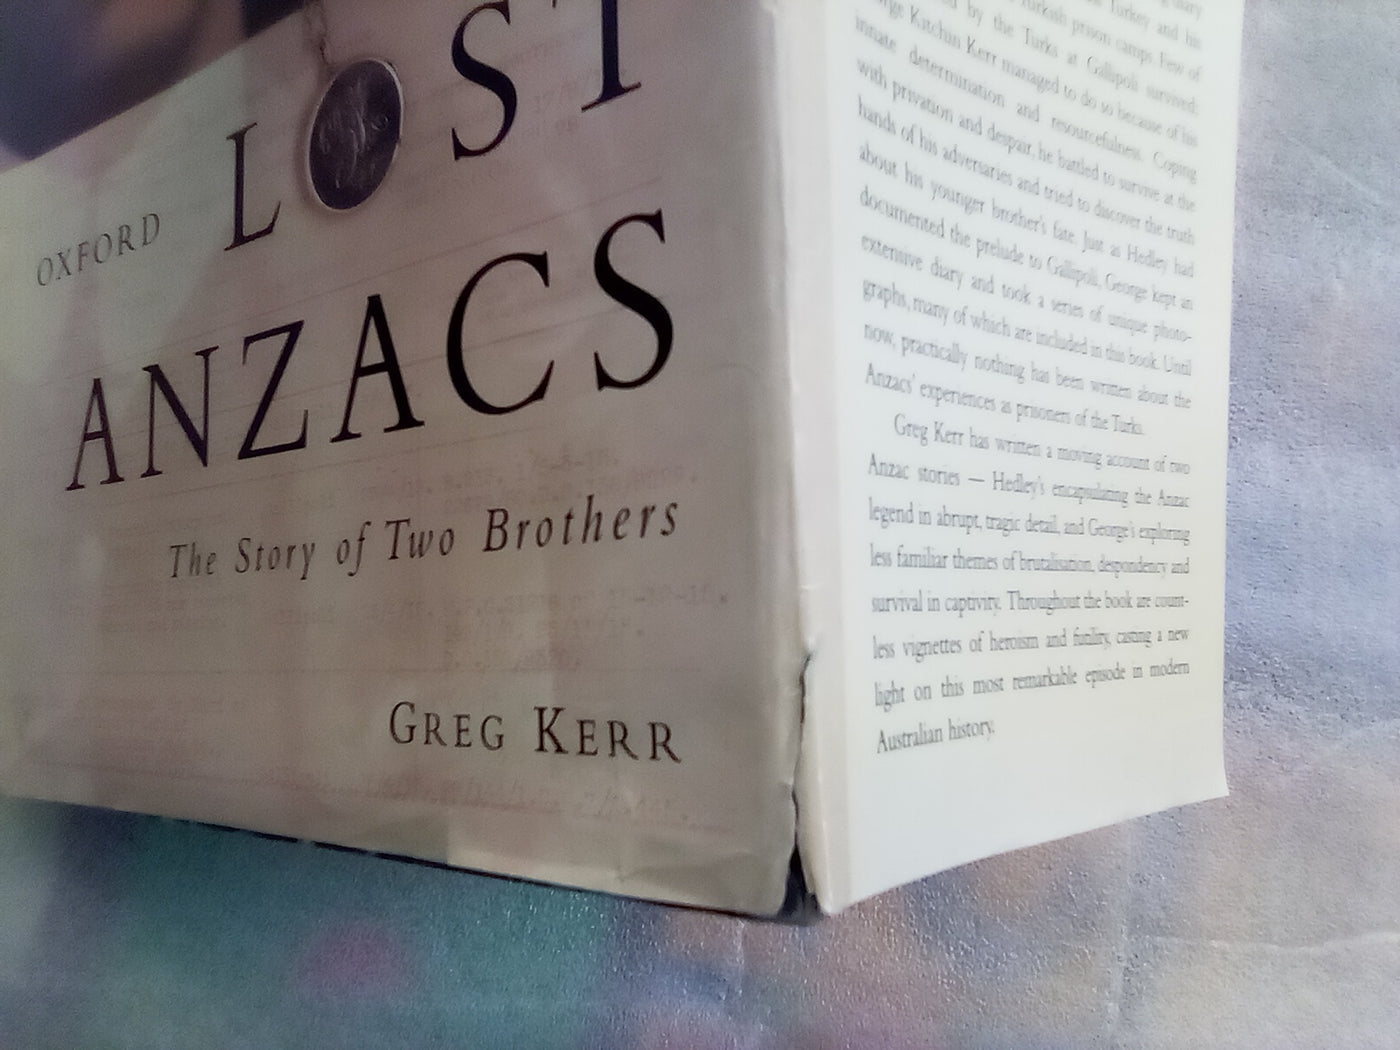 Lost ANZACs - The Story of Two Brothers by Greg Kerr